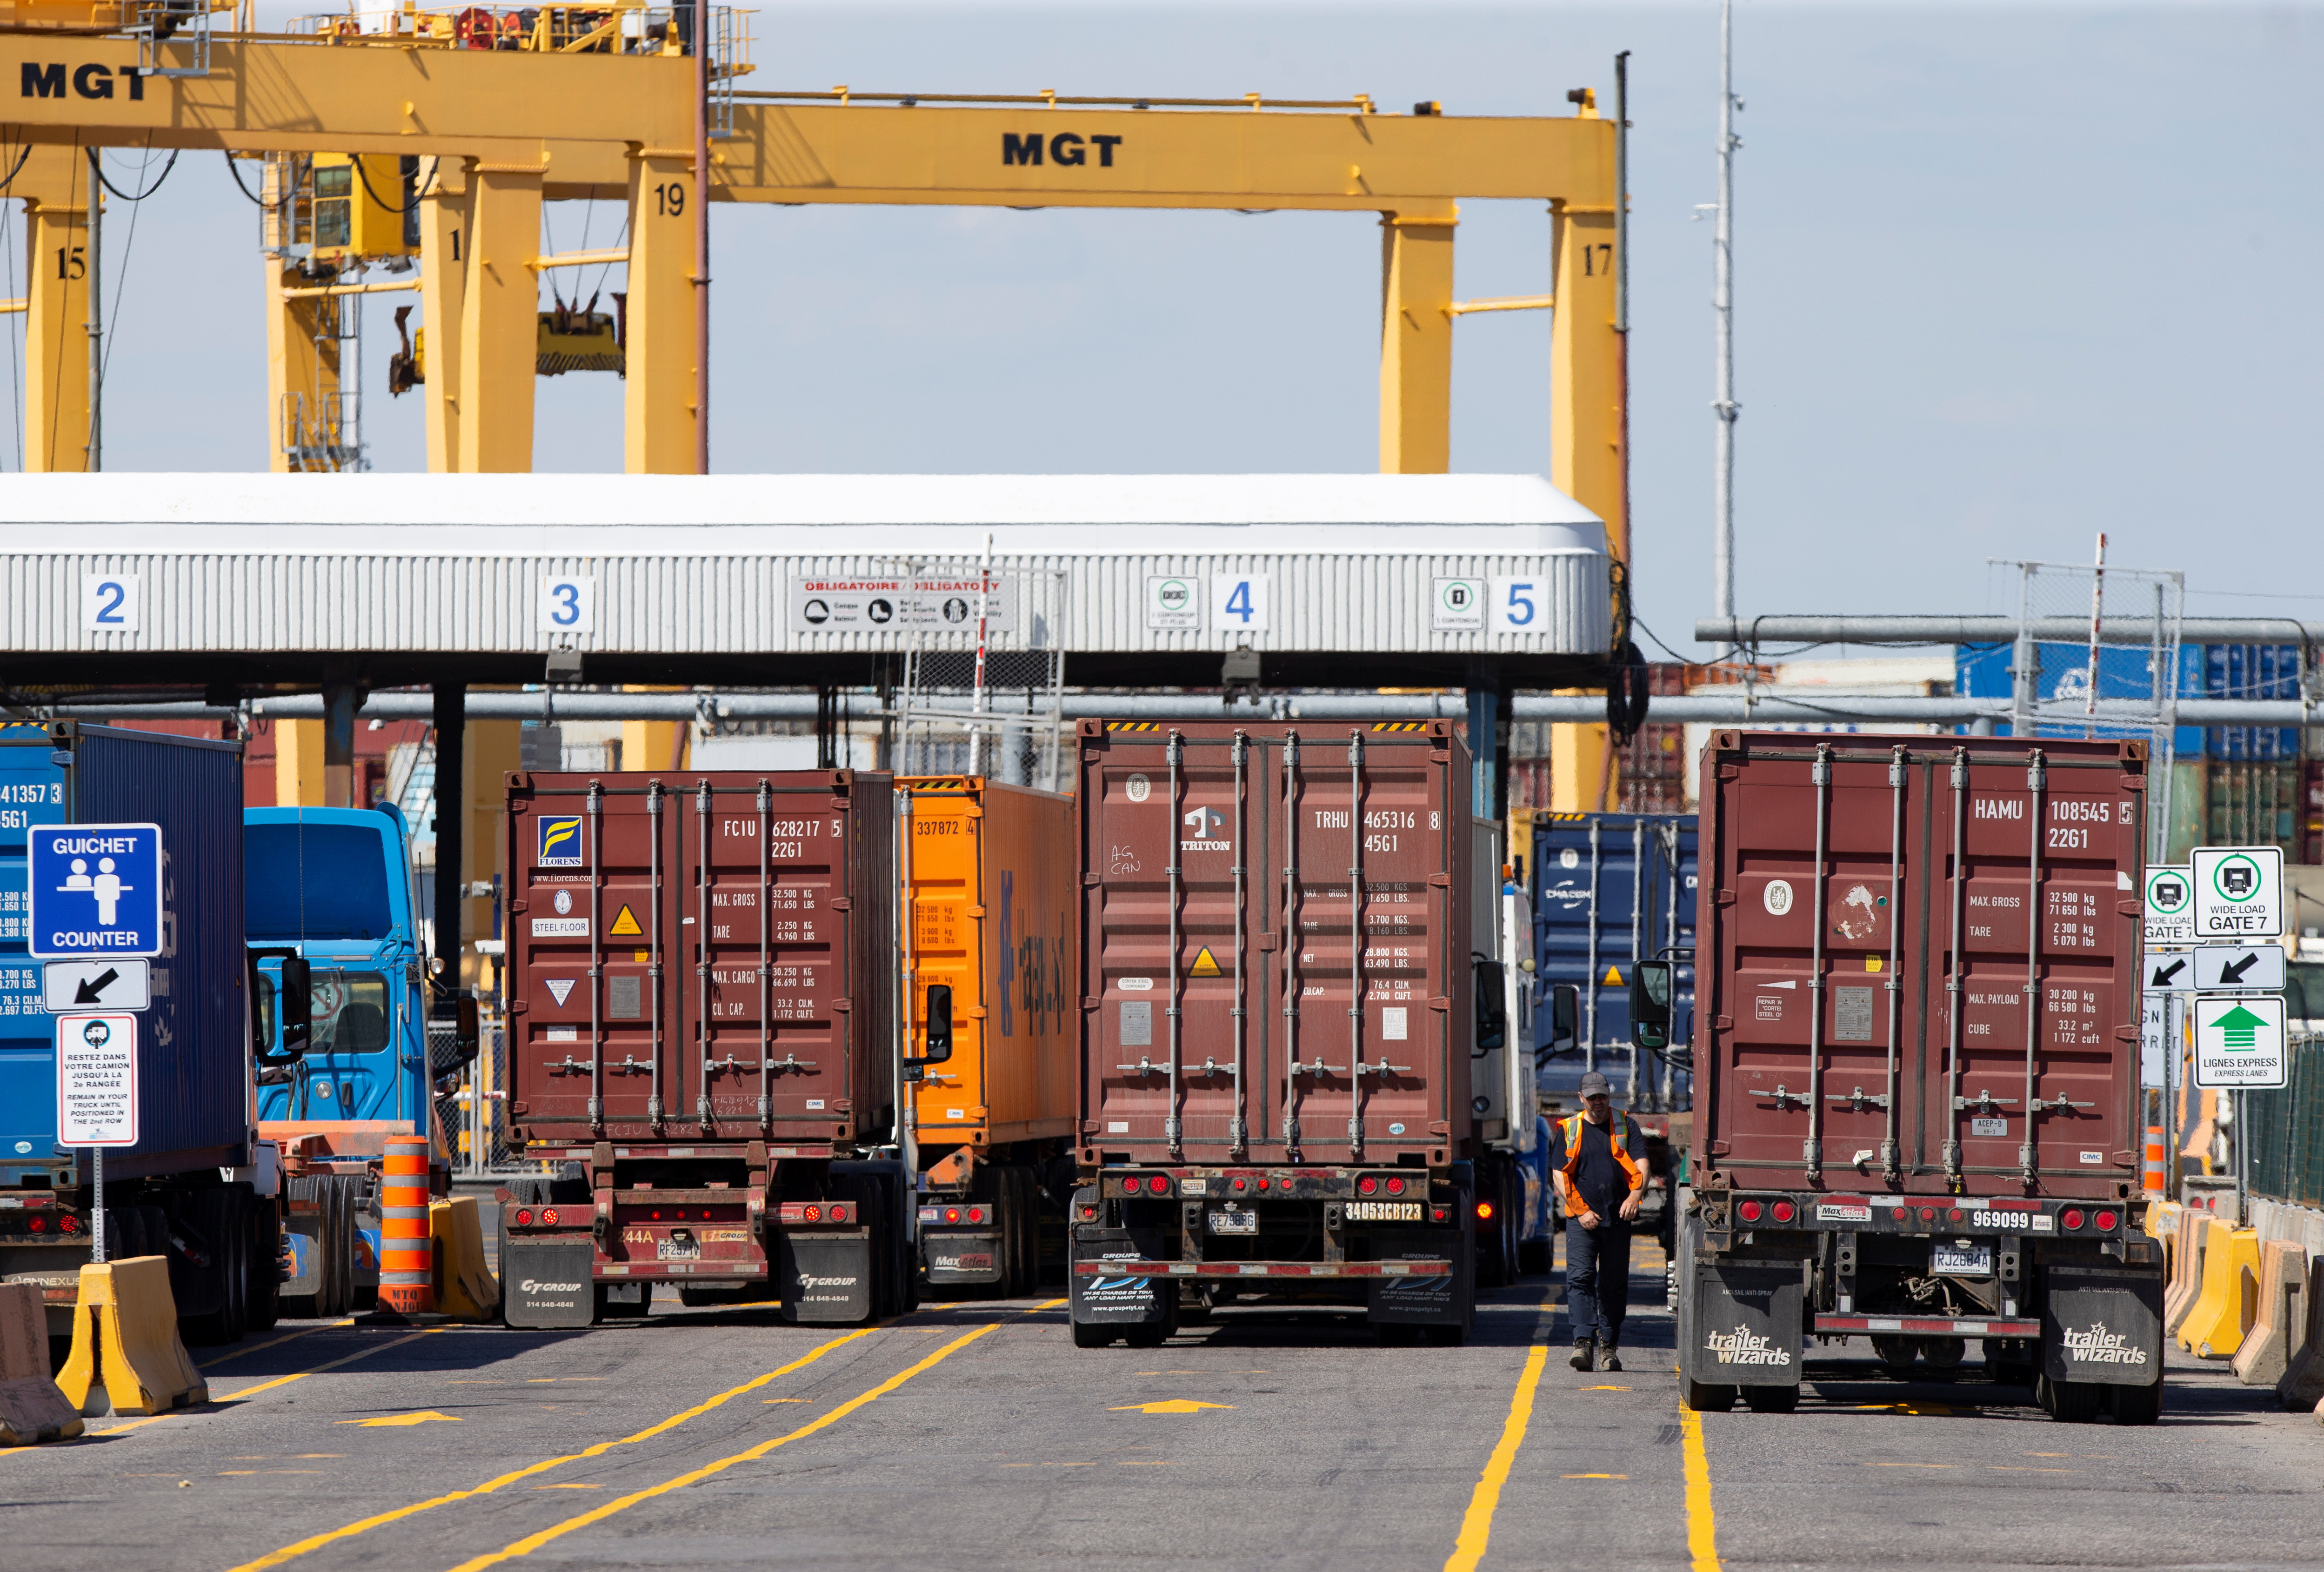 Trucks loaded with shipping containers arrive at the Port of Montreal